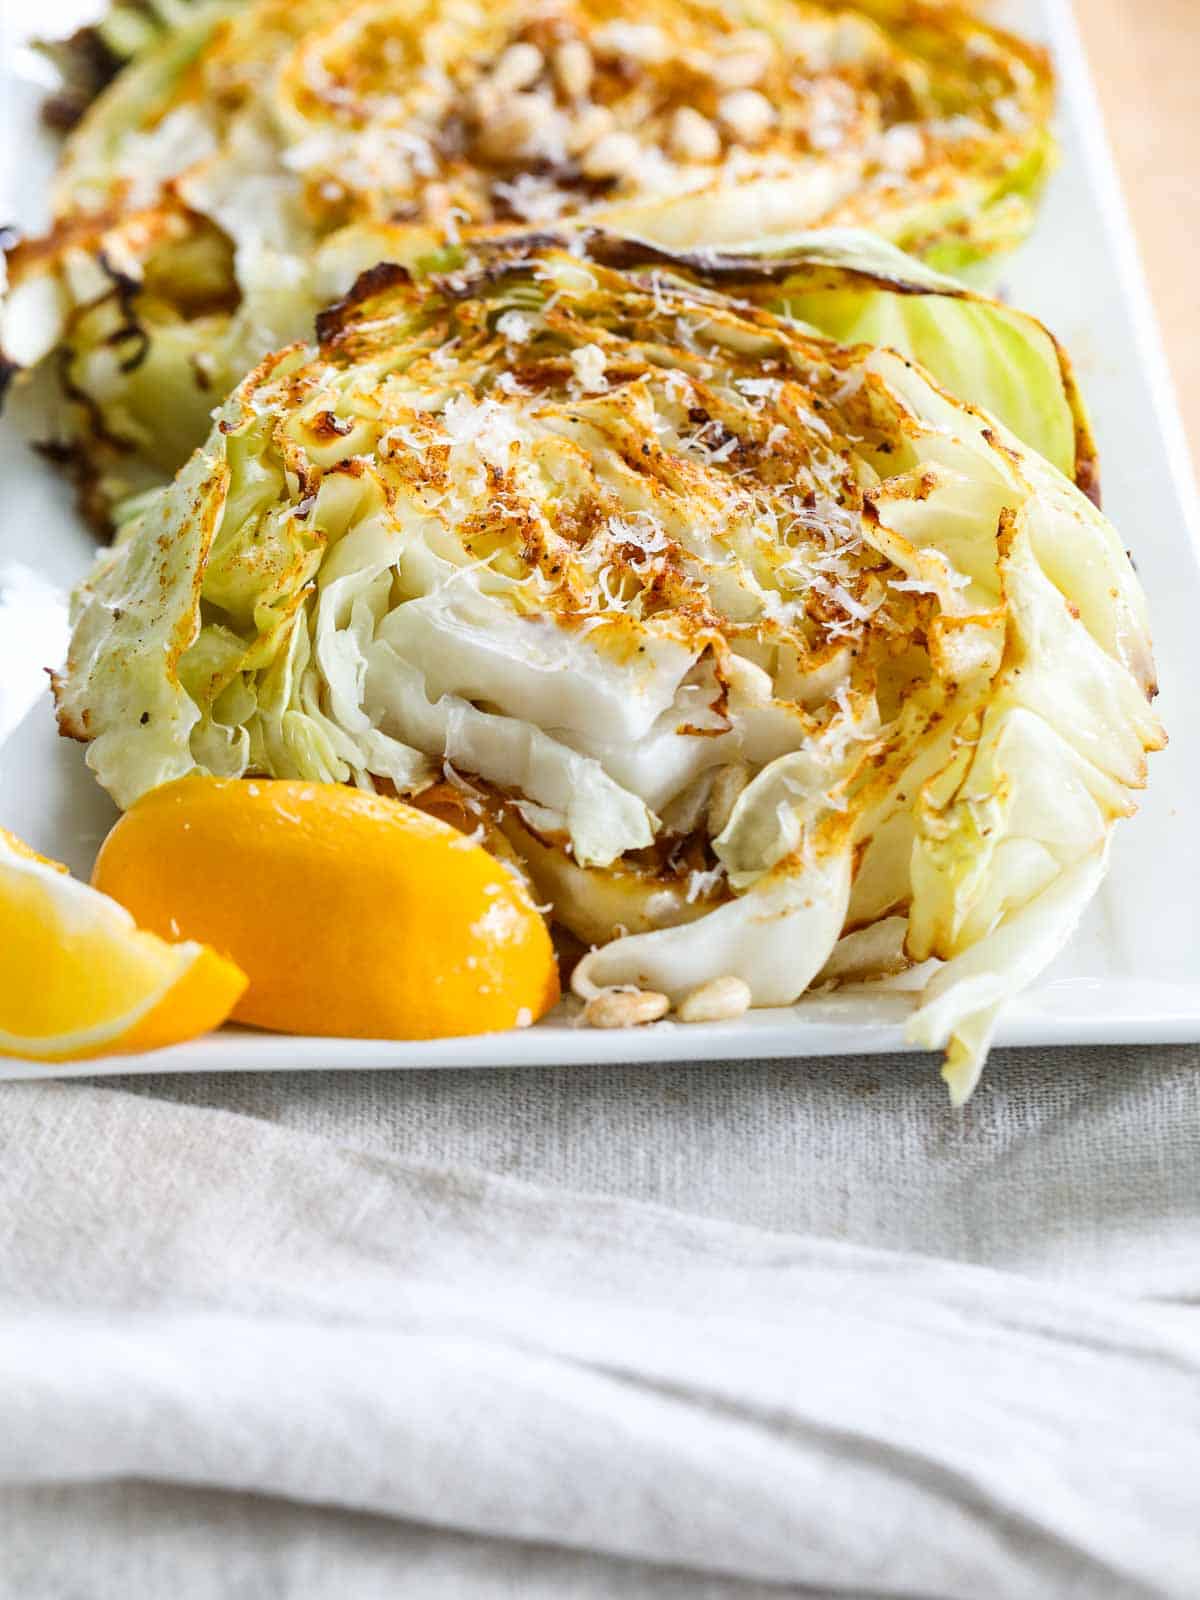 A white platter filled with cabbage steak, topped with shaved parmesan cheese and toasted pine nuts with lemon wedges.